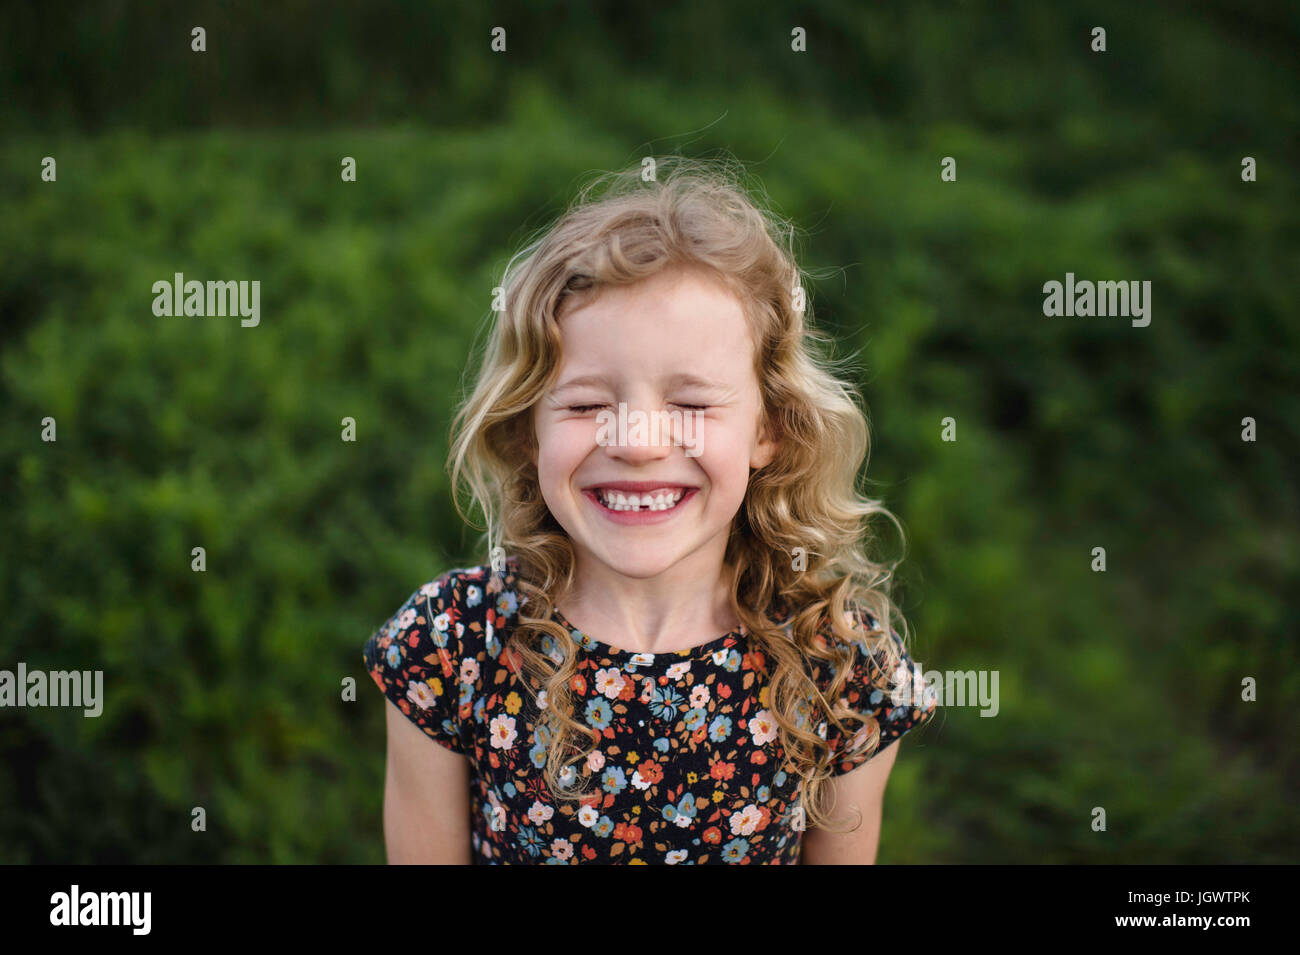 Portrait of girl with wavy blond hair and missing tooth in field Stock Photo